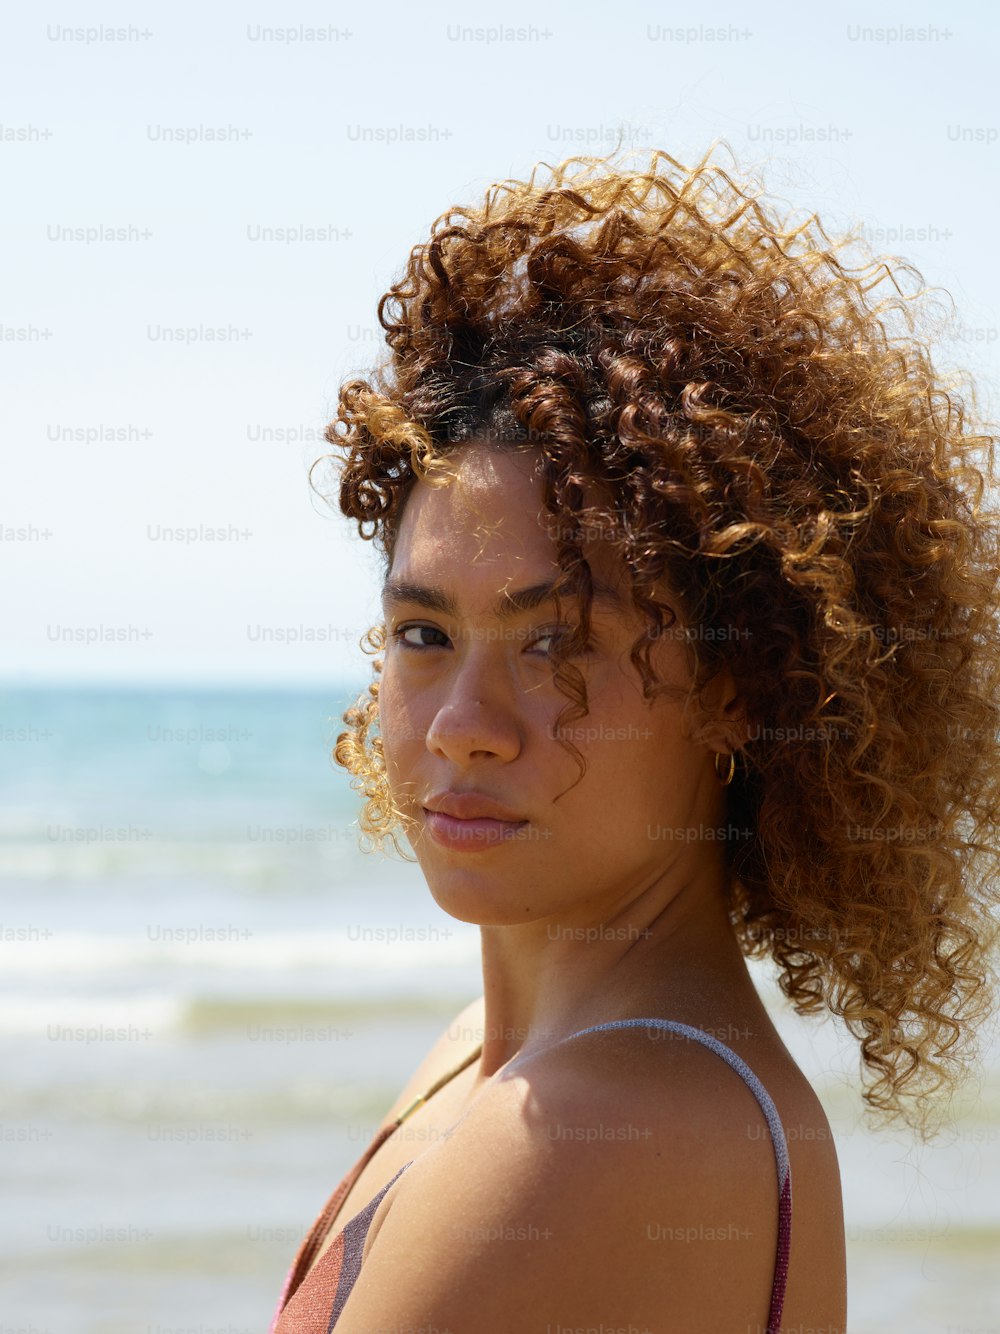 a close up of a person near the ocean